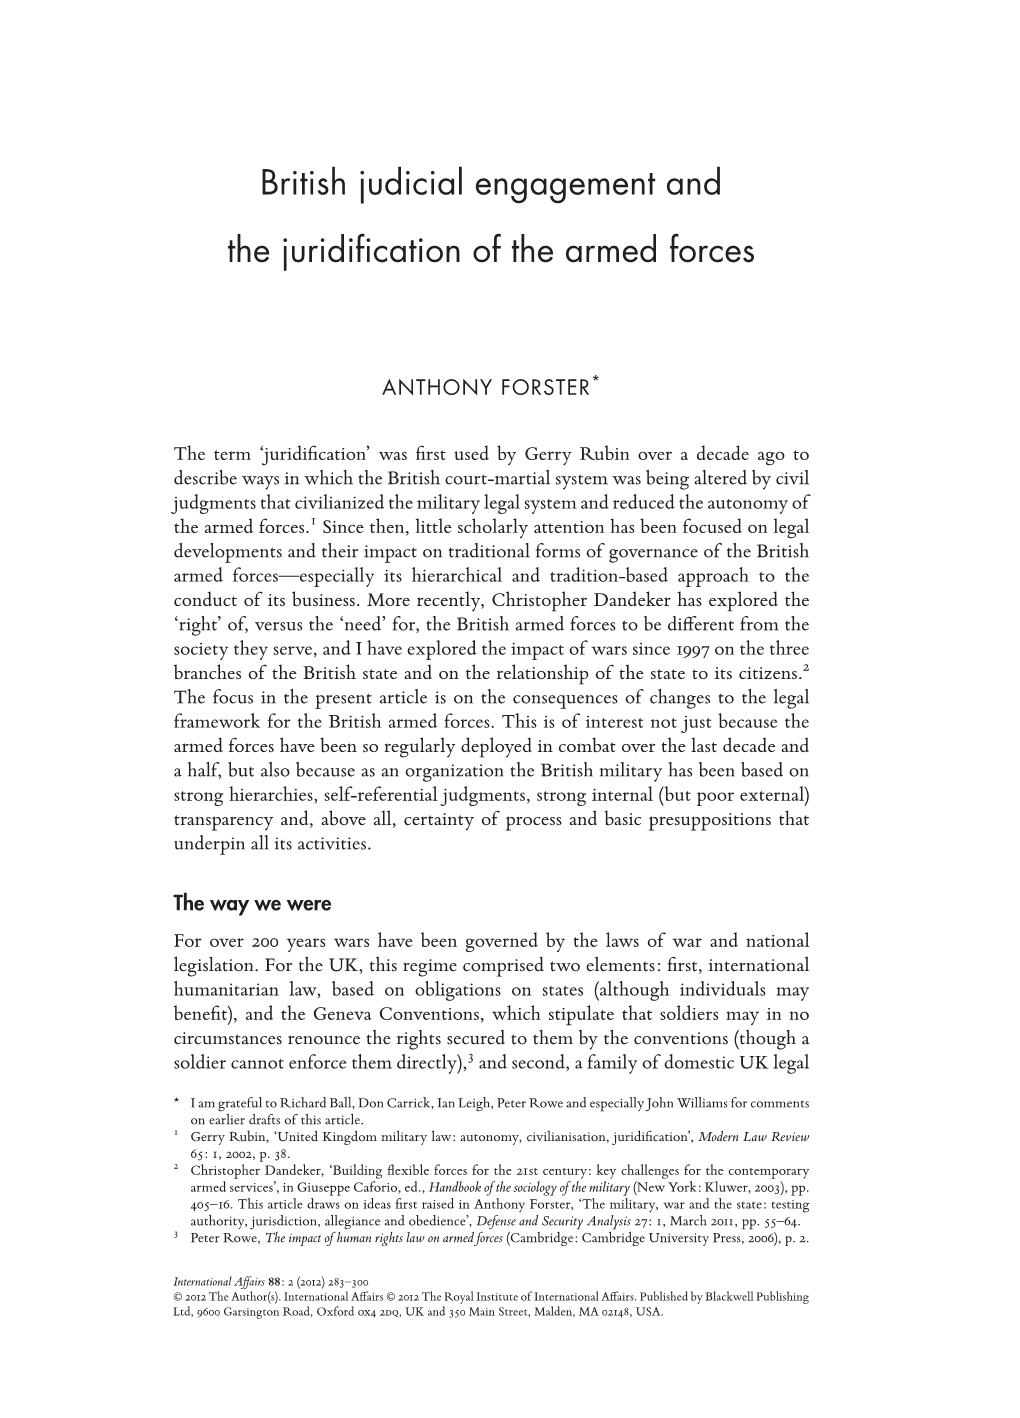 British Judicial Engagement and the Juridification of the Armed Forces